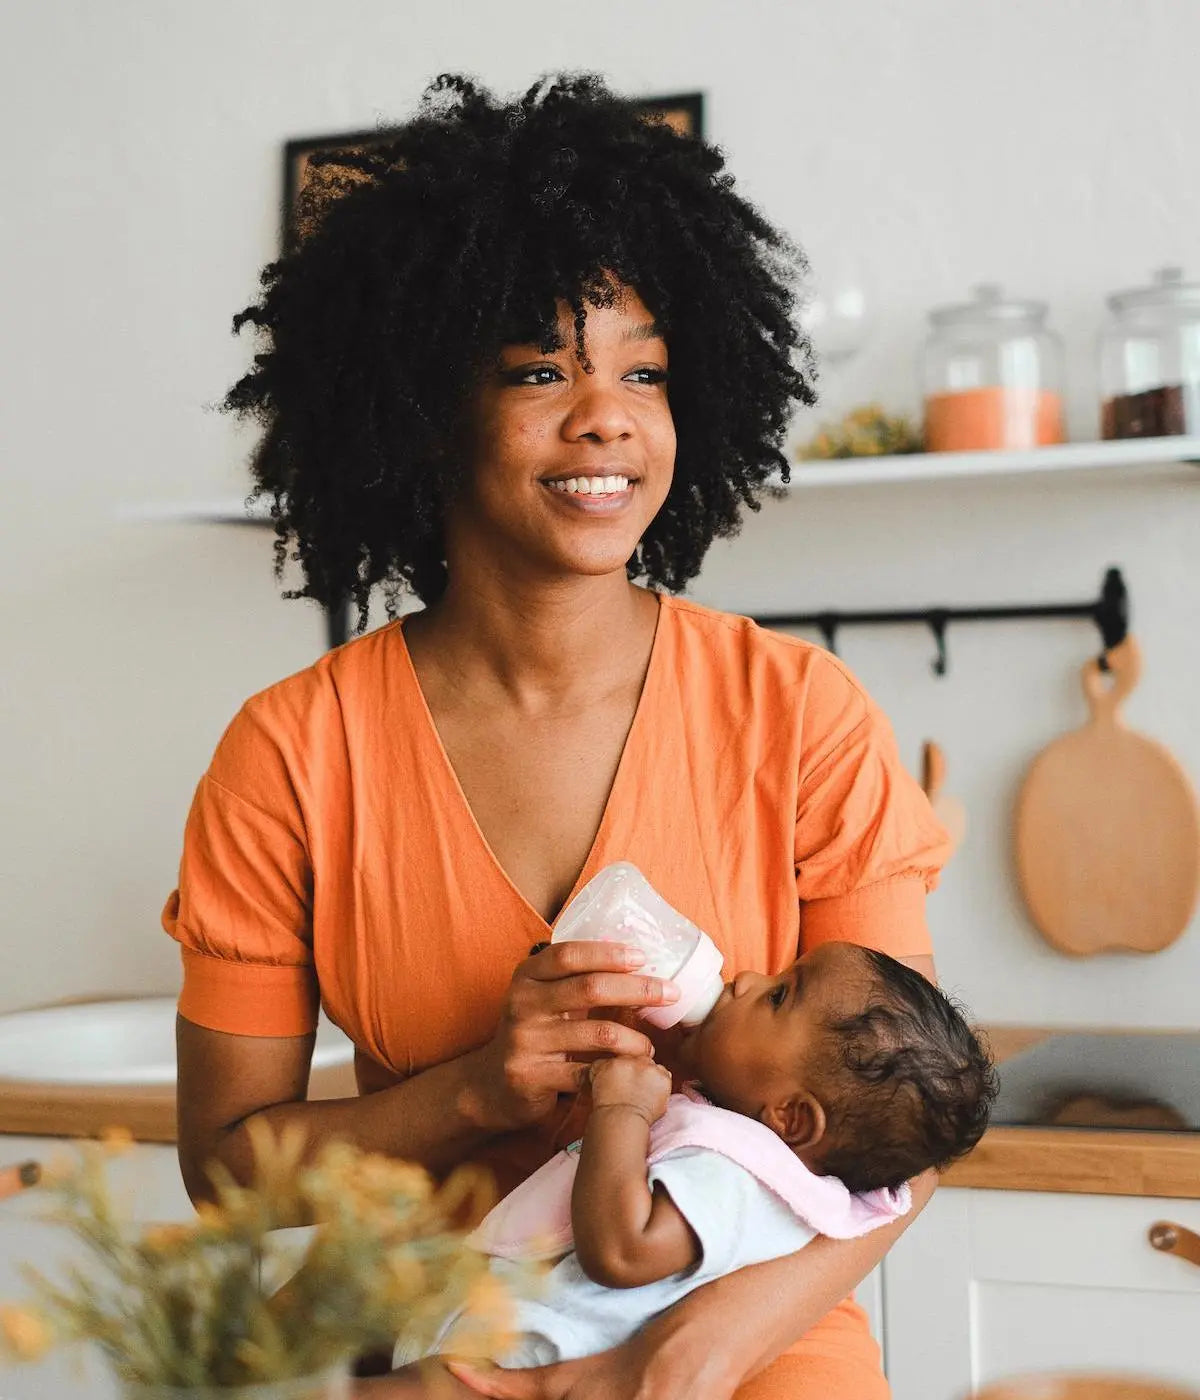 Breast Milk Storage and Tips from the CDC and Moms who Pump